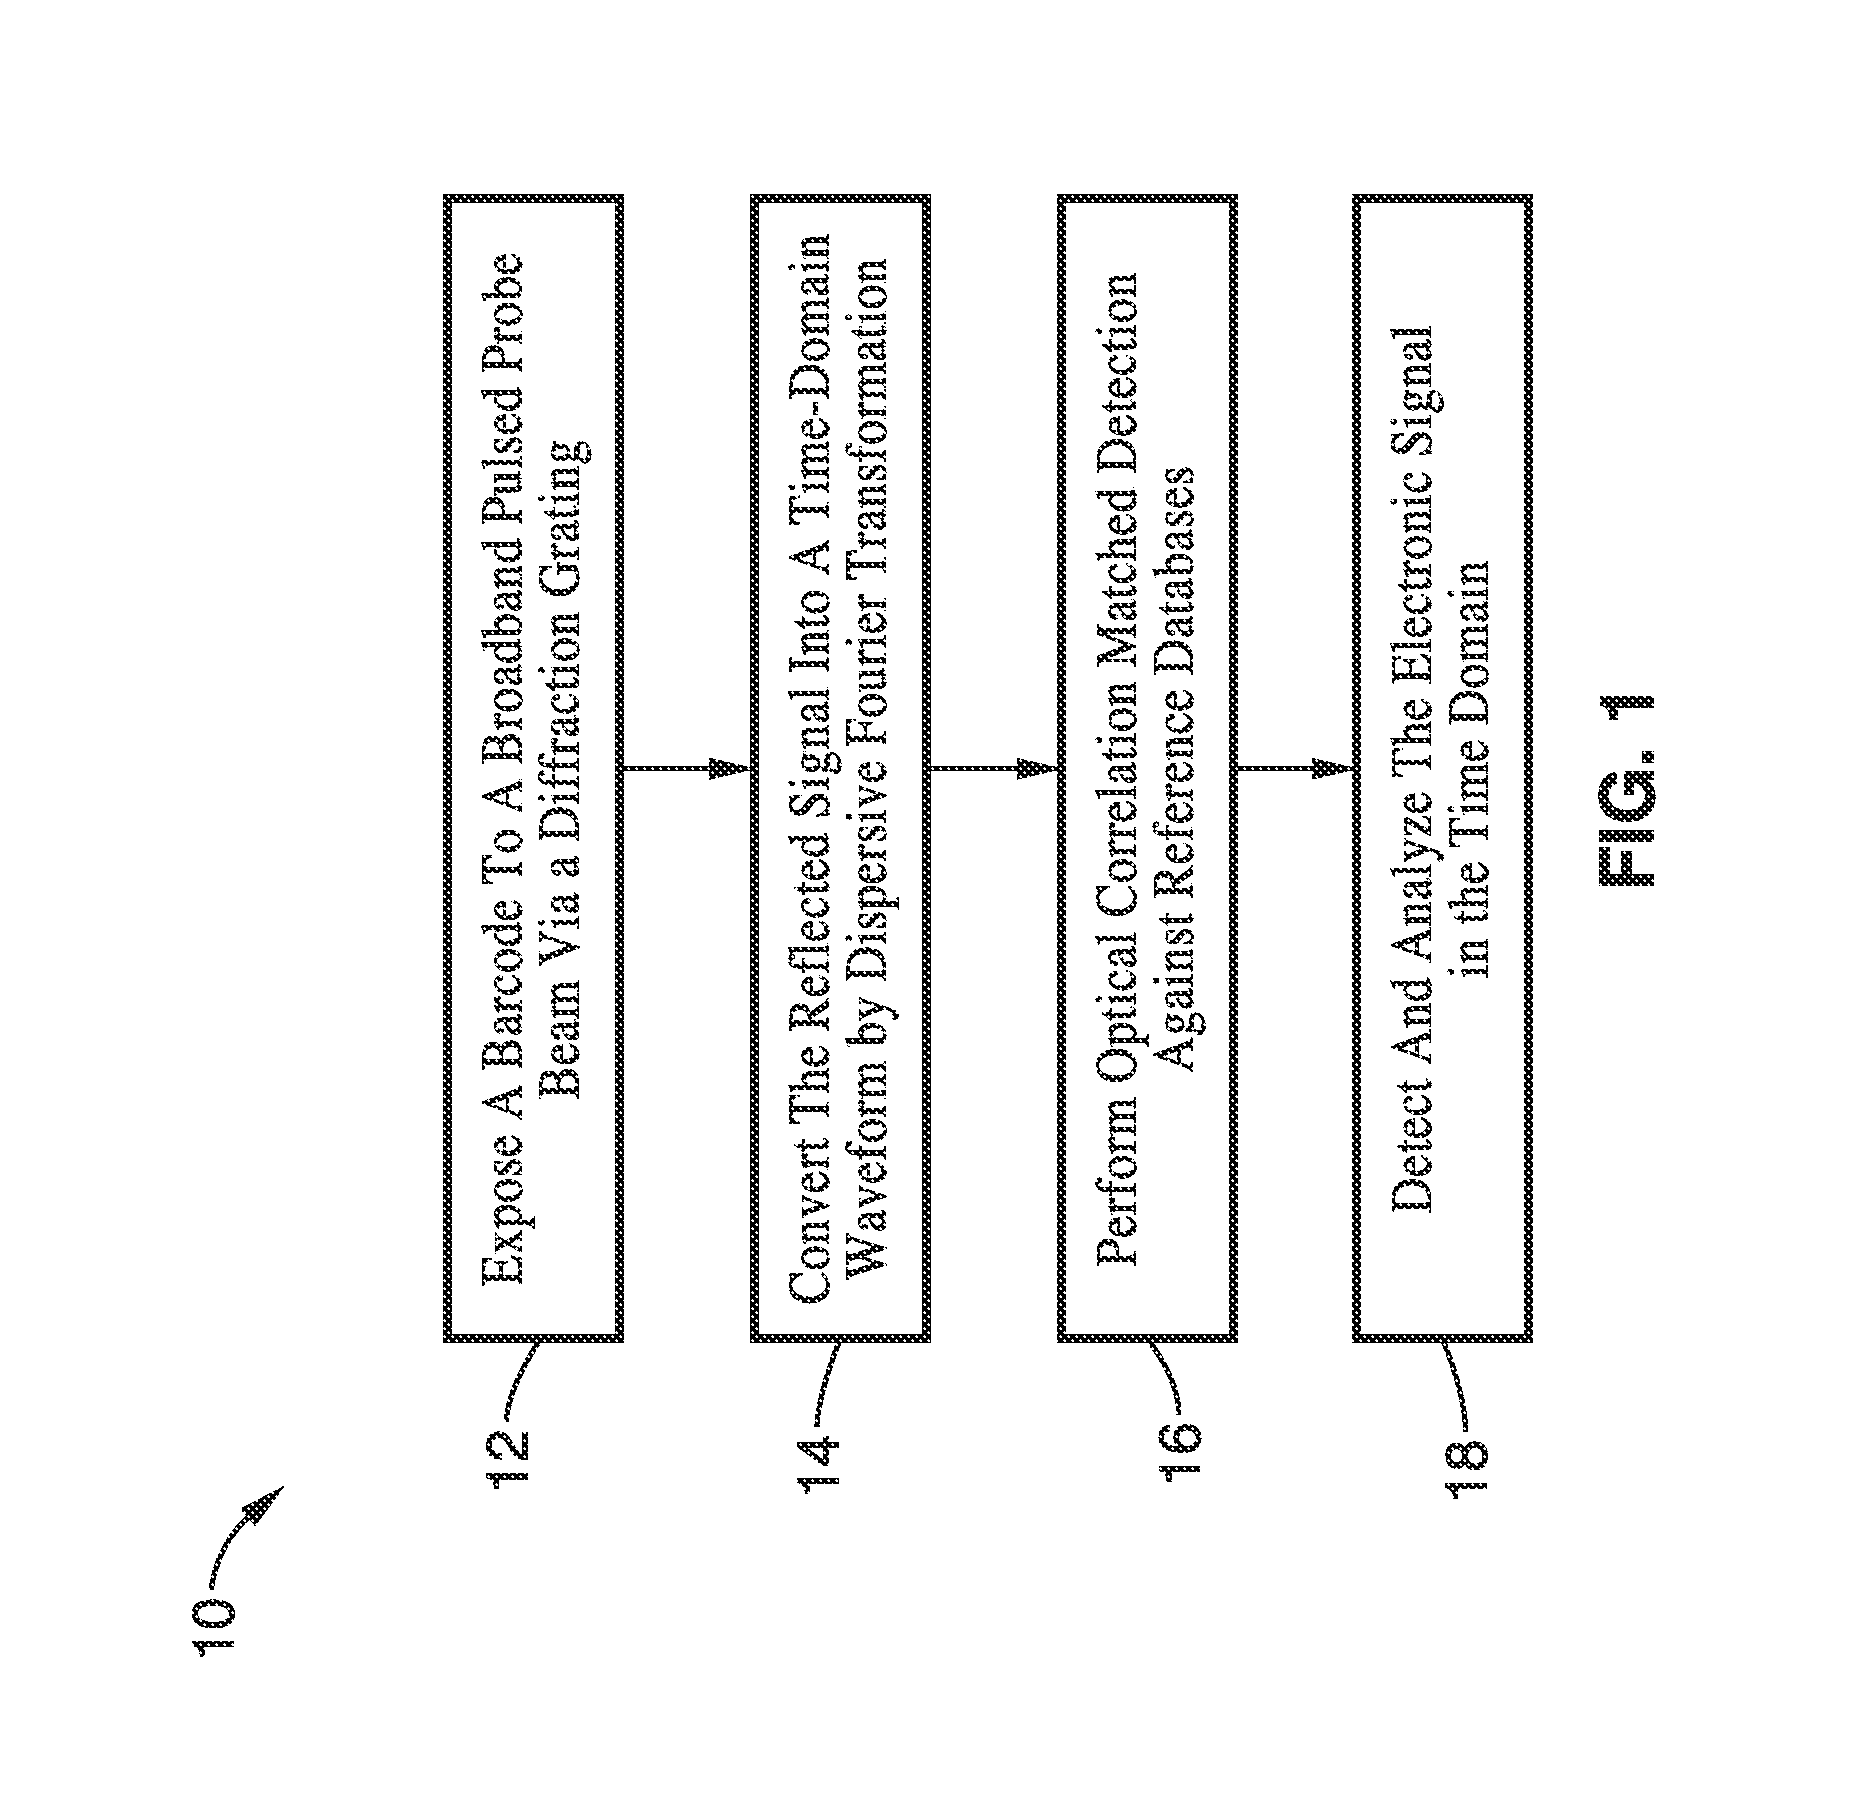 Apparatus and method for dispersive fourier-transform imaging